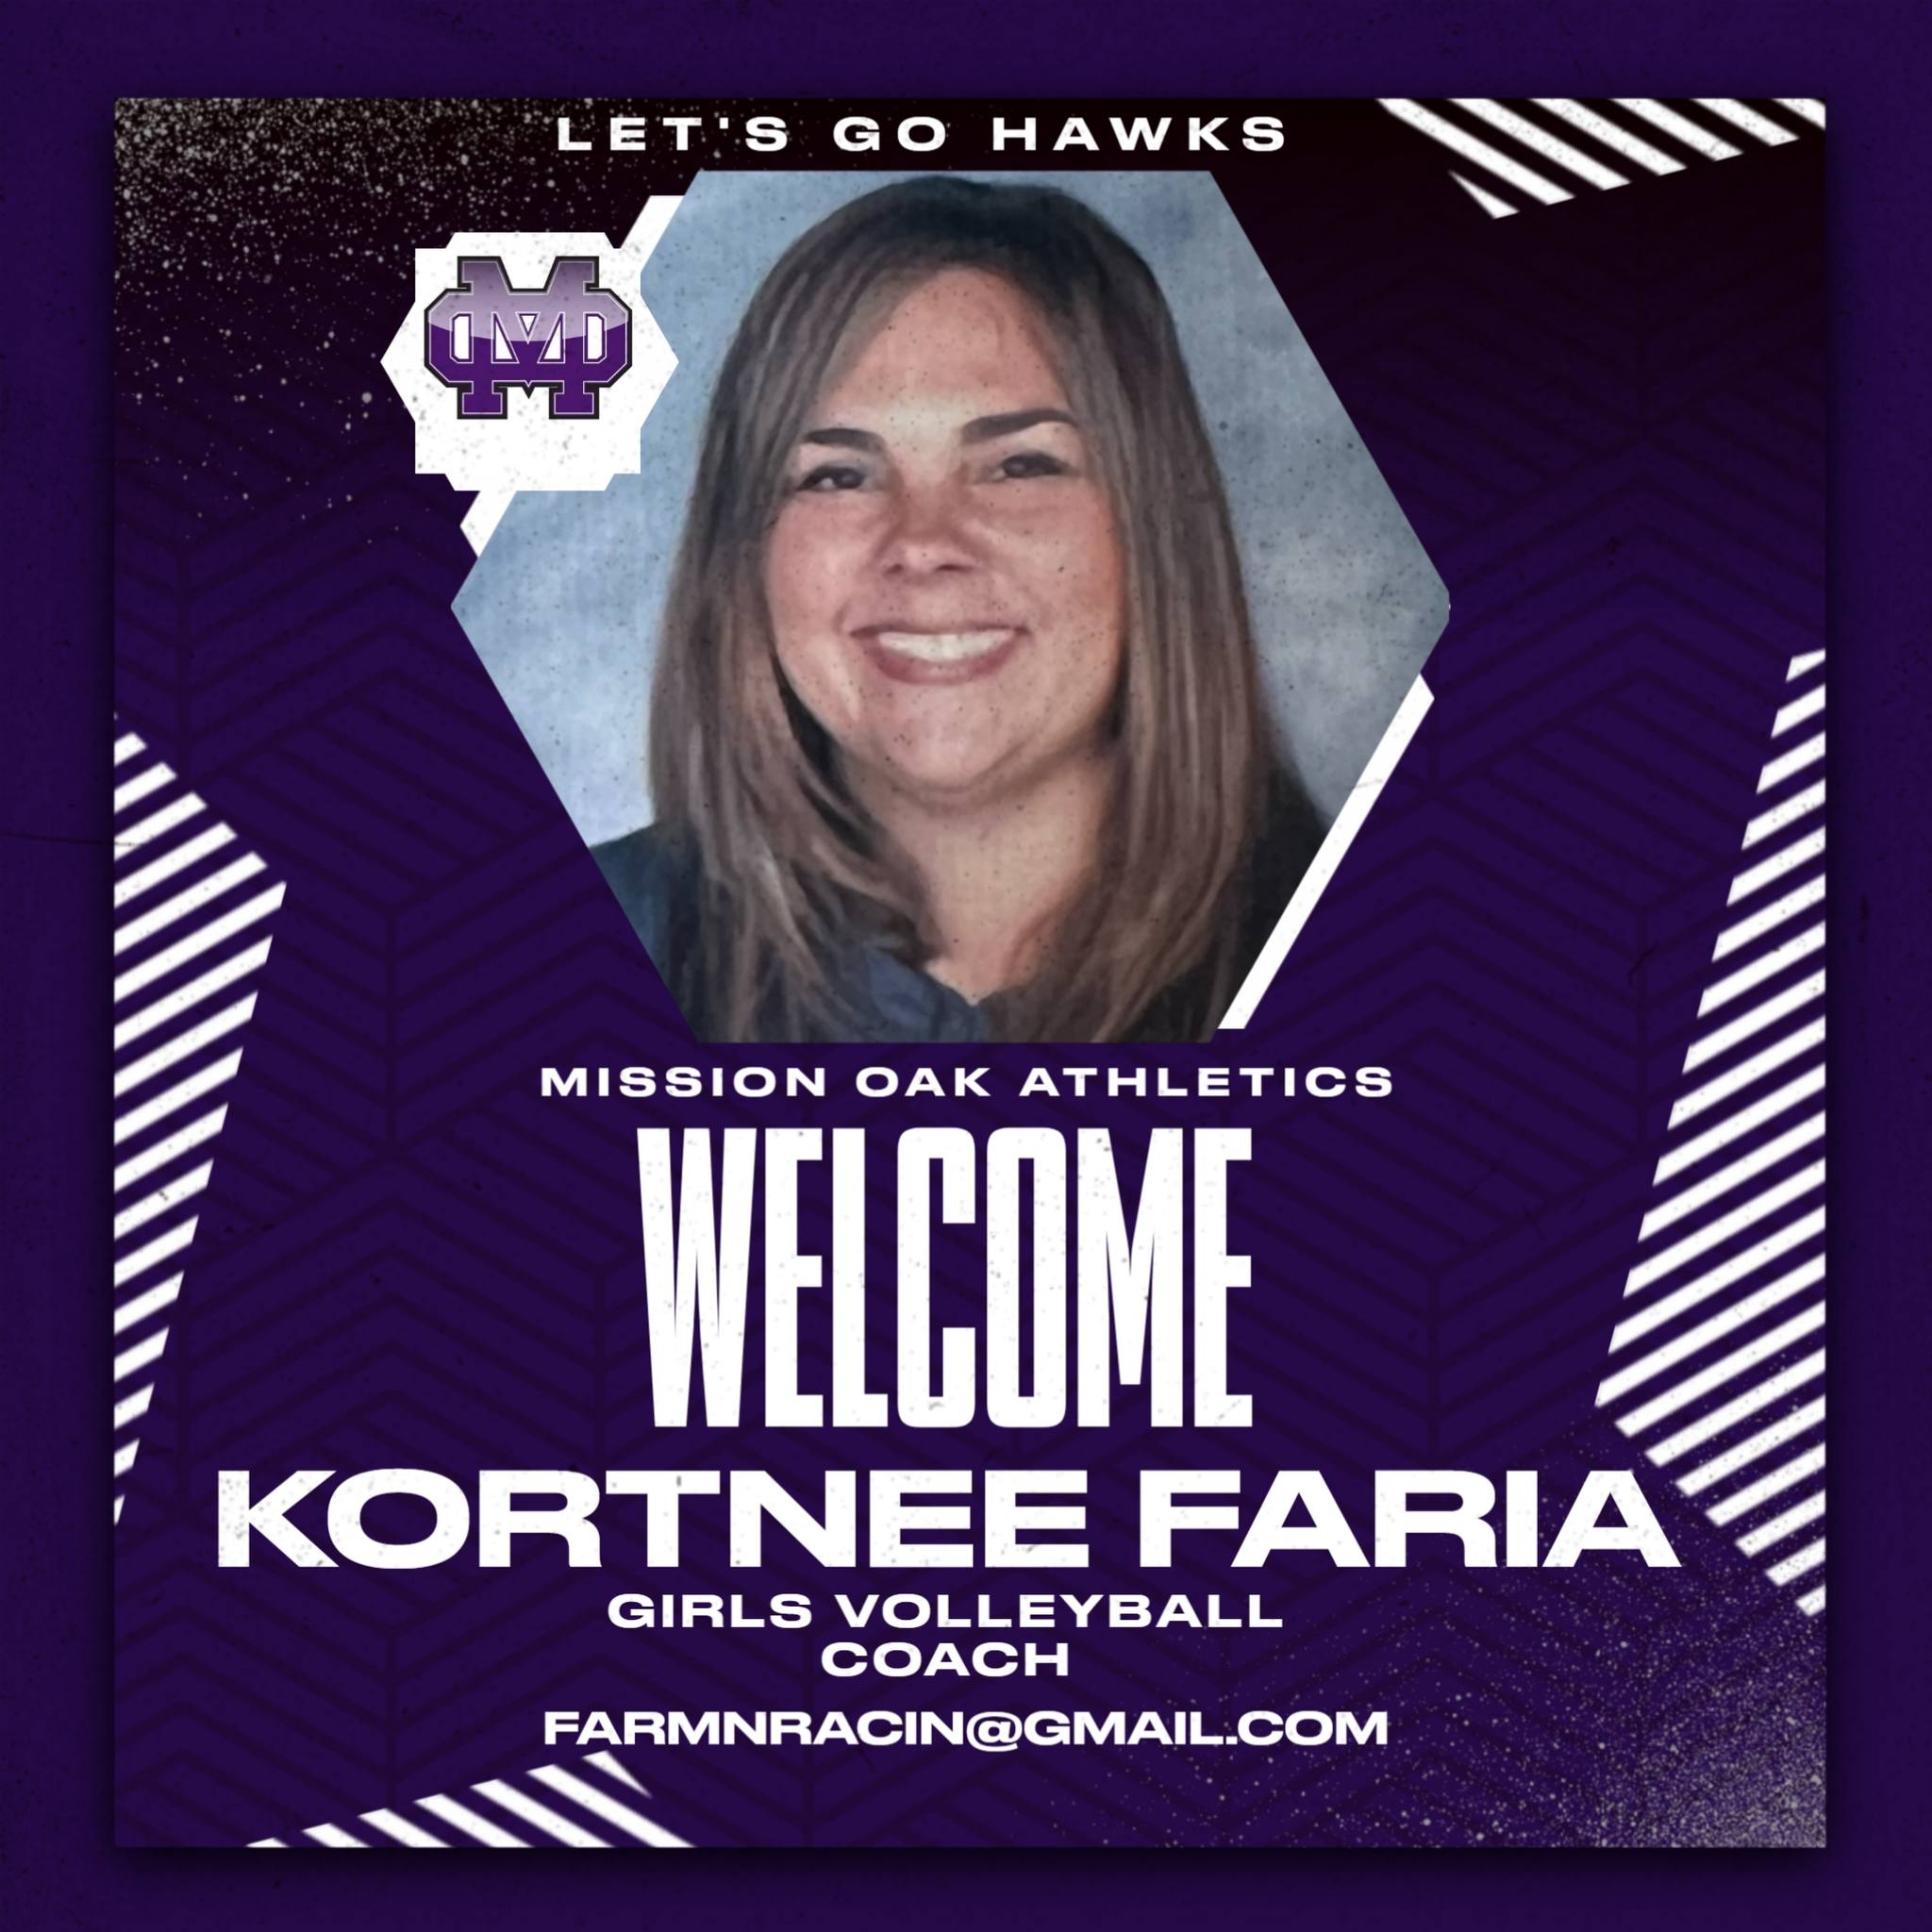 WELCOME KORTNEE FARIA  - Content Image for demo19365_bigteams_com